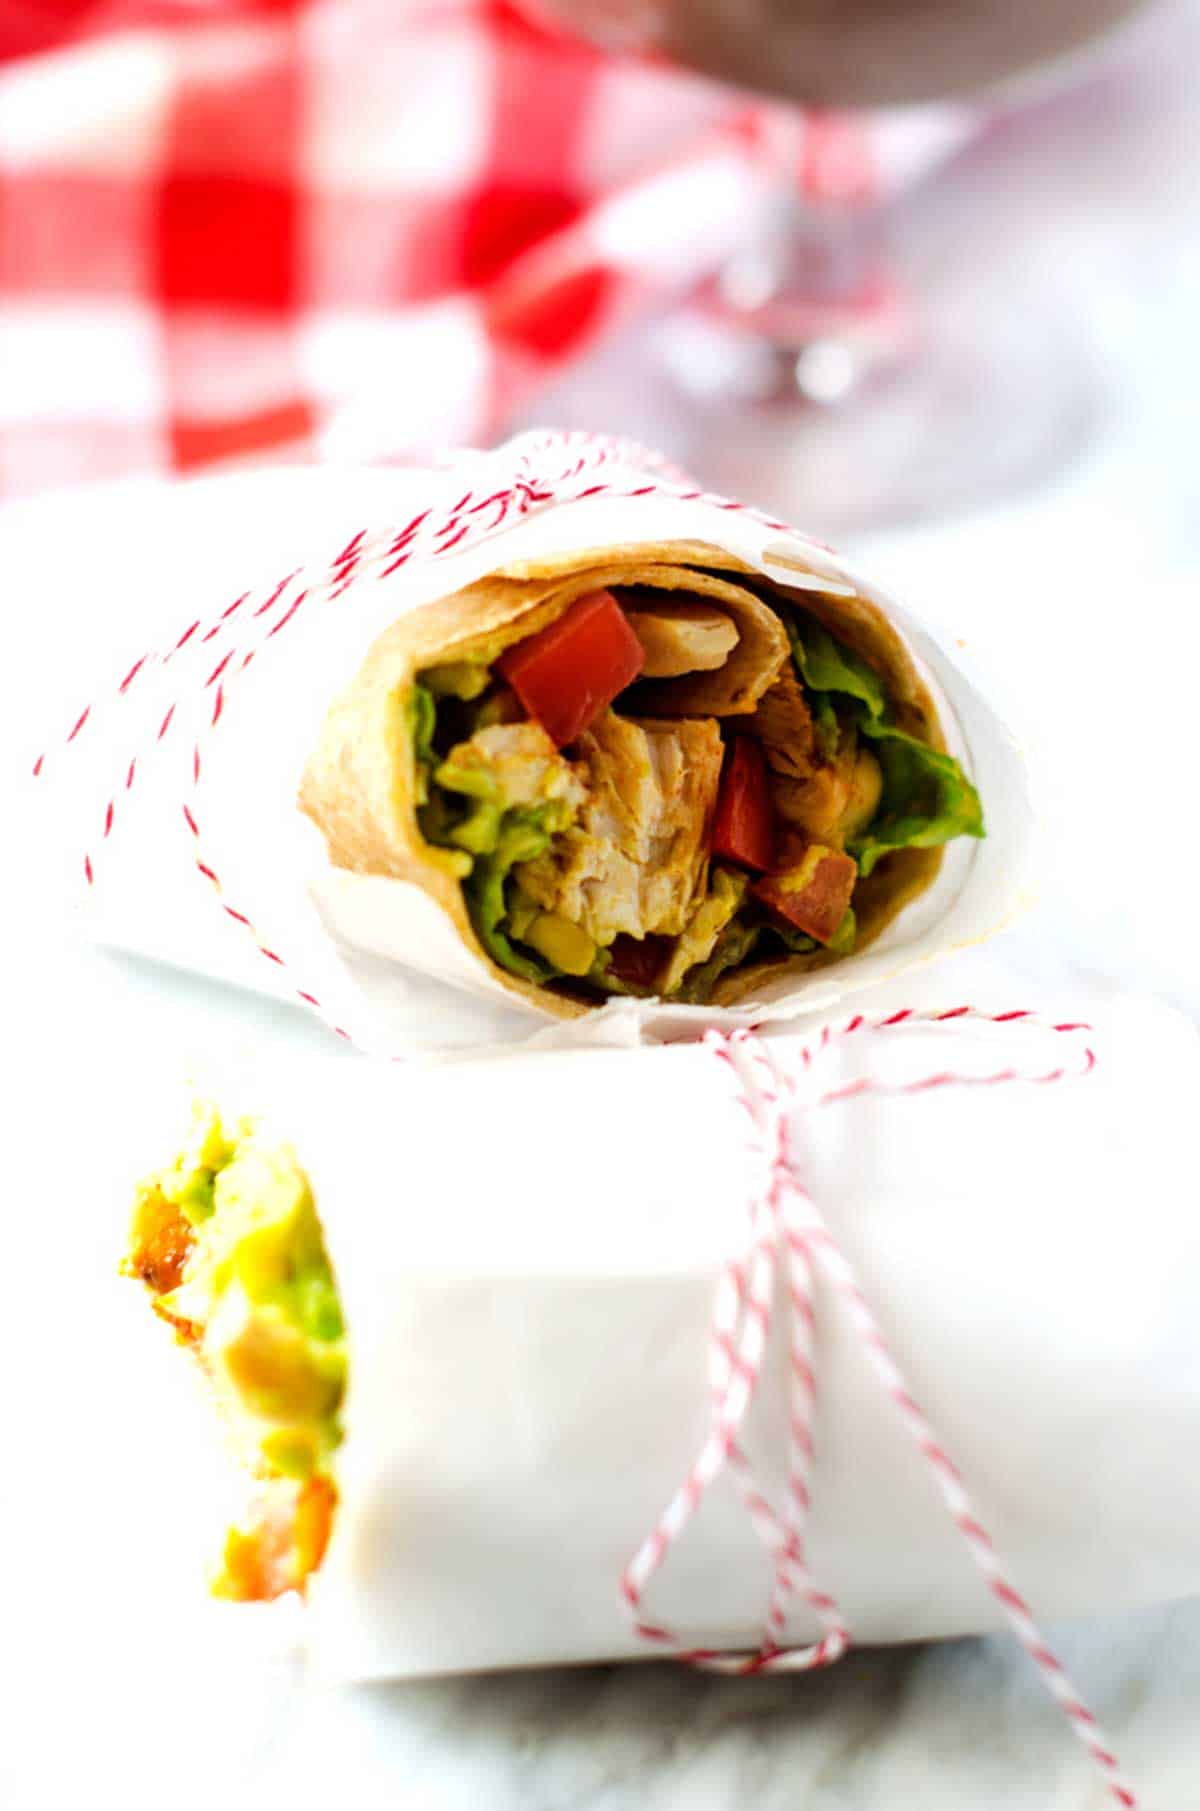 Photo of a guacamole wrap in parchment tied with red and white string.